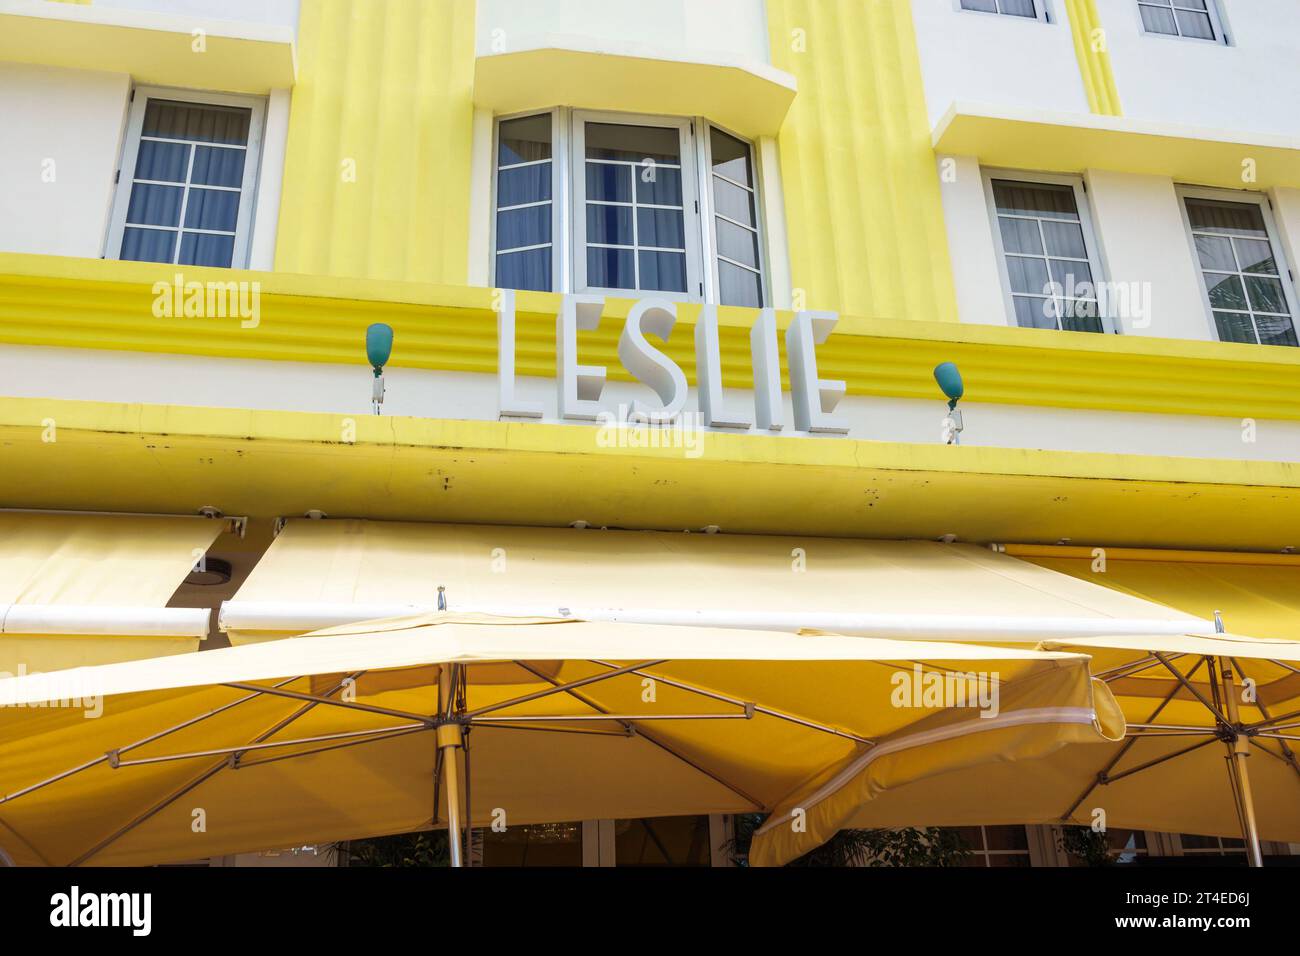 Miami Beach Florida,outside exterior,building front entrance hotel,Ocean Drive Leslie Hotel Ocean Drive sign,Art Deco style architecture,hotels motels Stock Photo